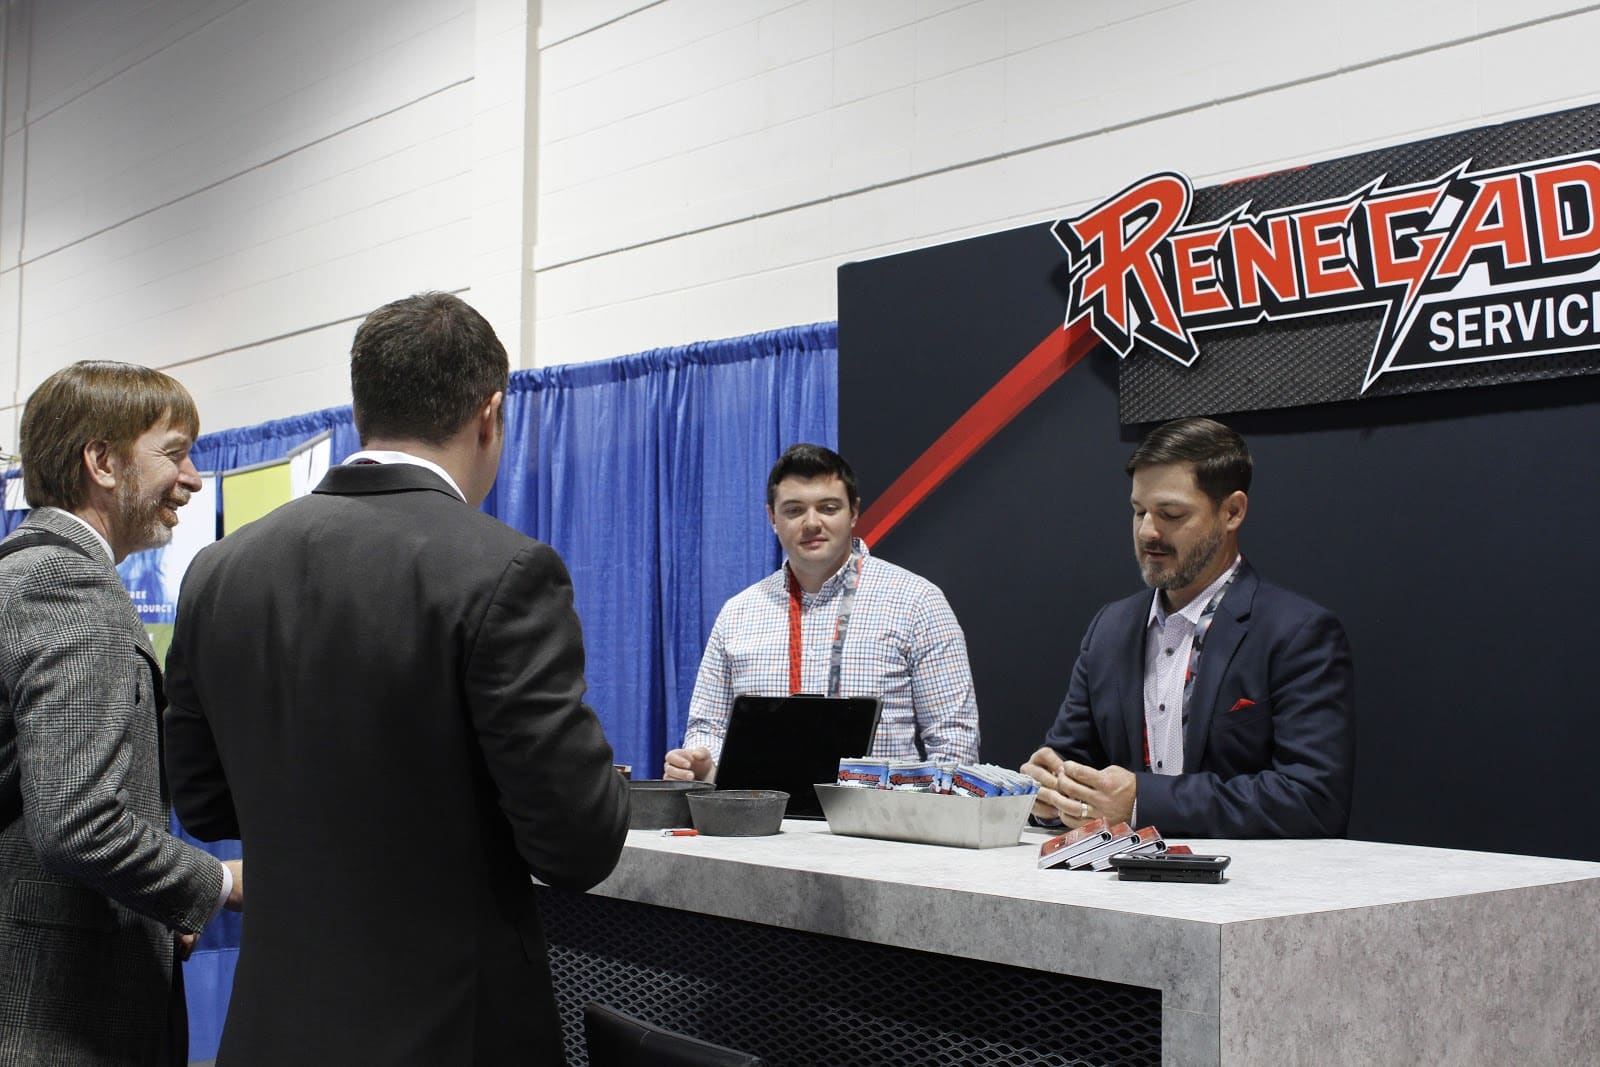 Renegade Services takes part in ATCE Calgary